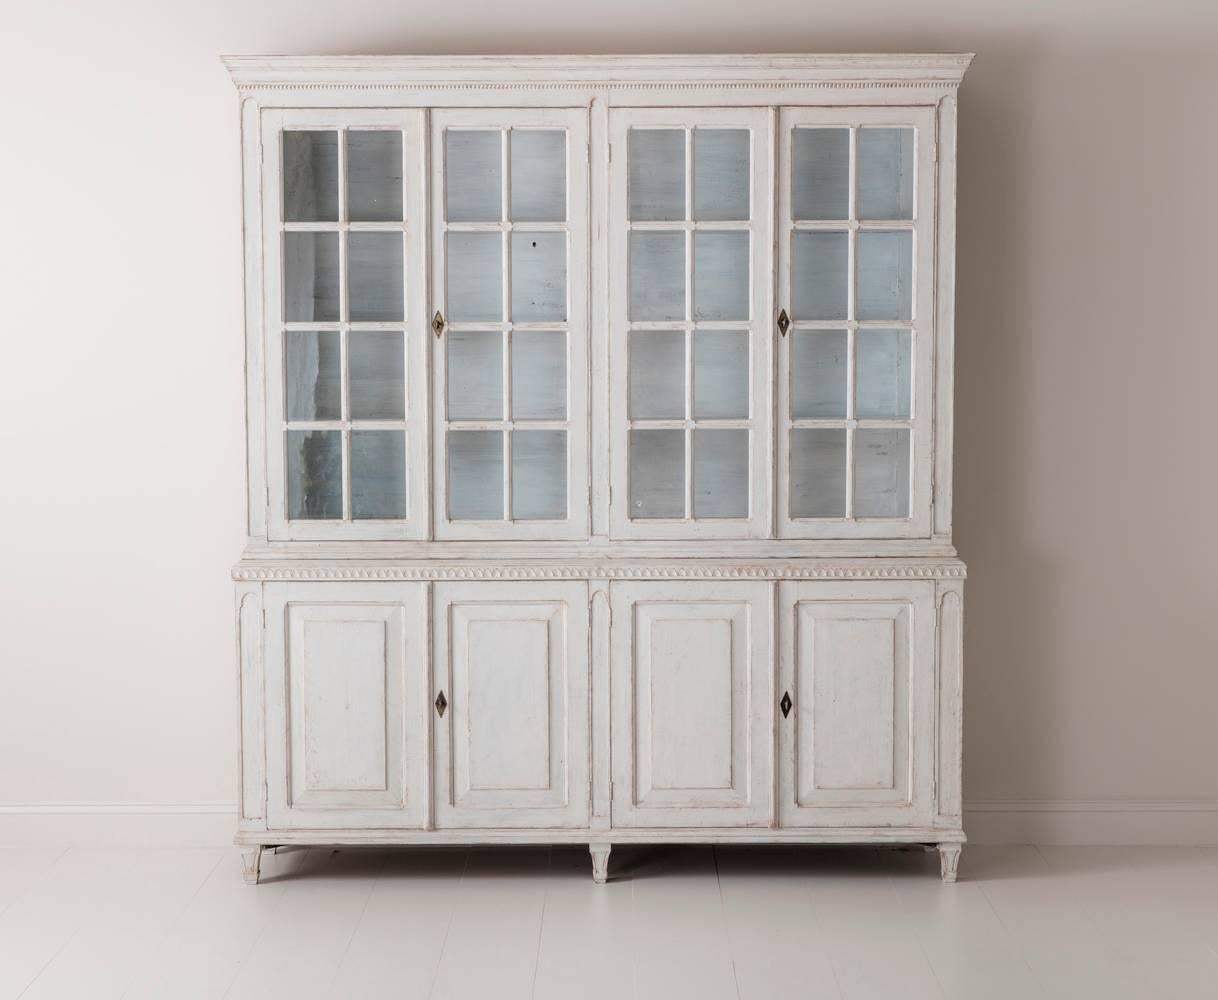 A beautiful Swedish Gustavian style four-door painted vitrine cabinet from the 19th century. This bookcase is made in two parts. The upper section has three fixed shelves behind original glass doors. 
The shelf depth is 10 3/4 inches at the bottom